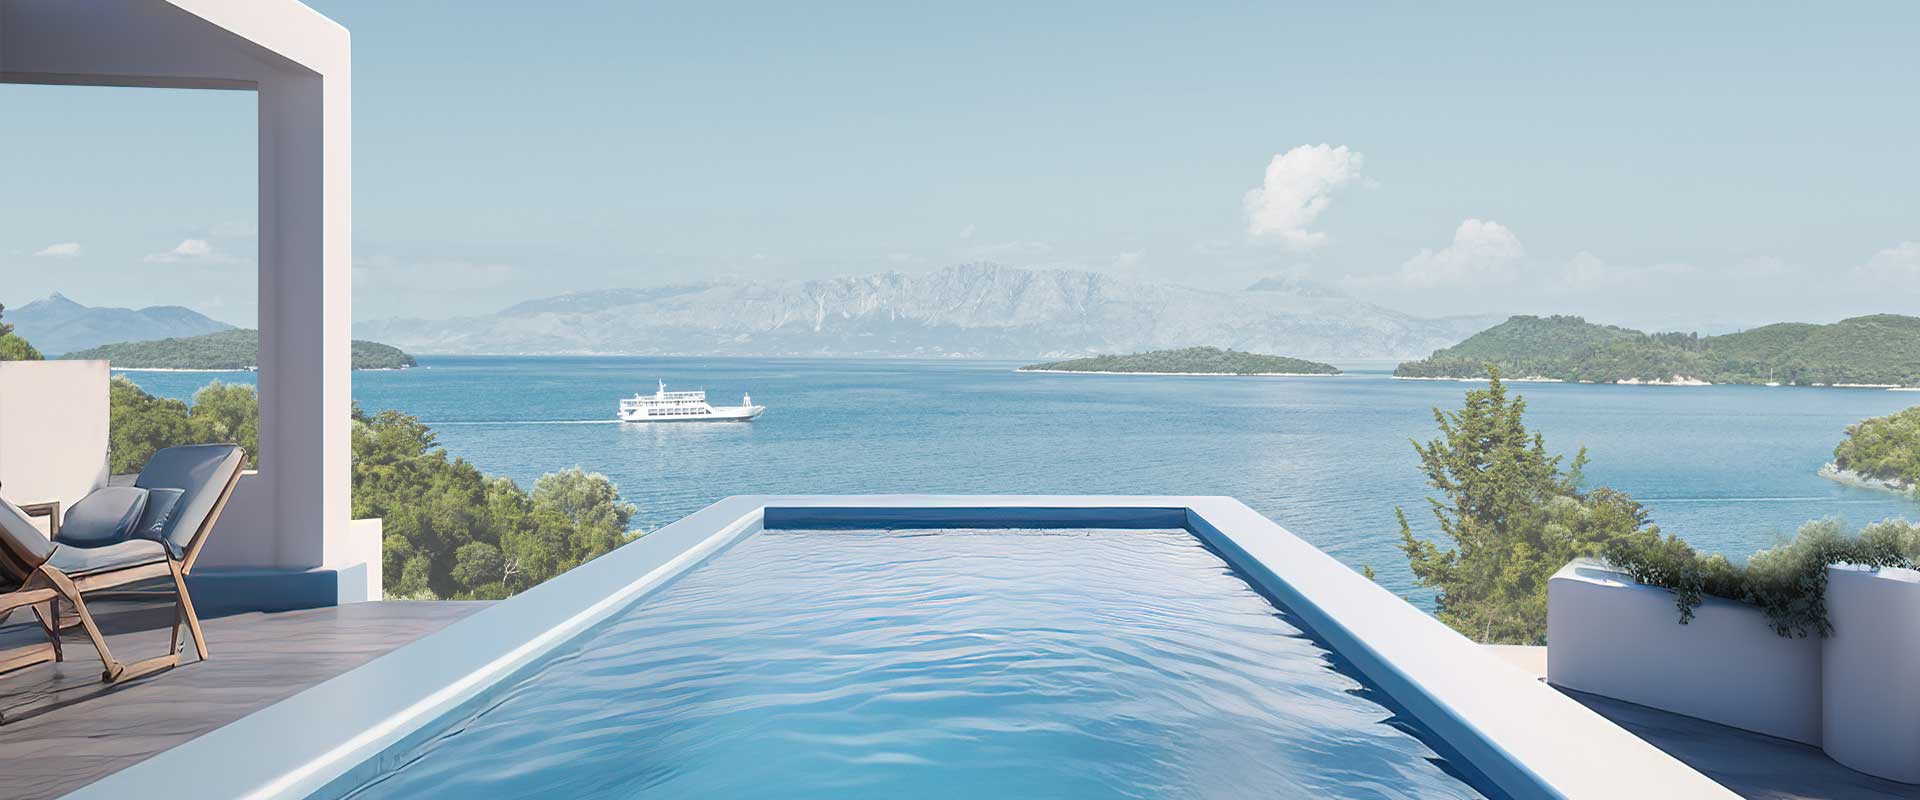 Inviting pool on a hill with an expansive view of the sparkling sea, showcasing the breathtaking beauty you can own with Rural Land for Sale in Lefkada.